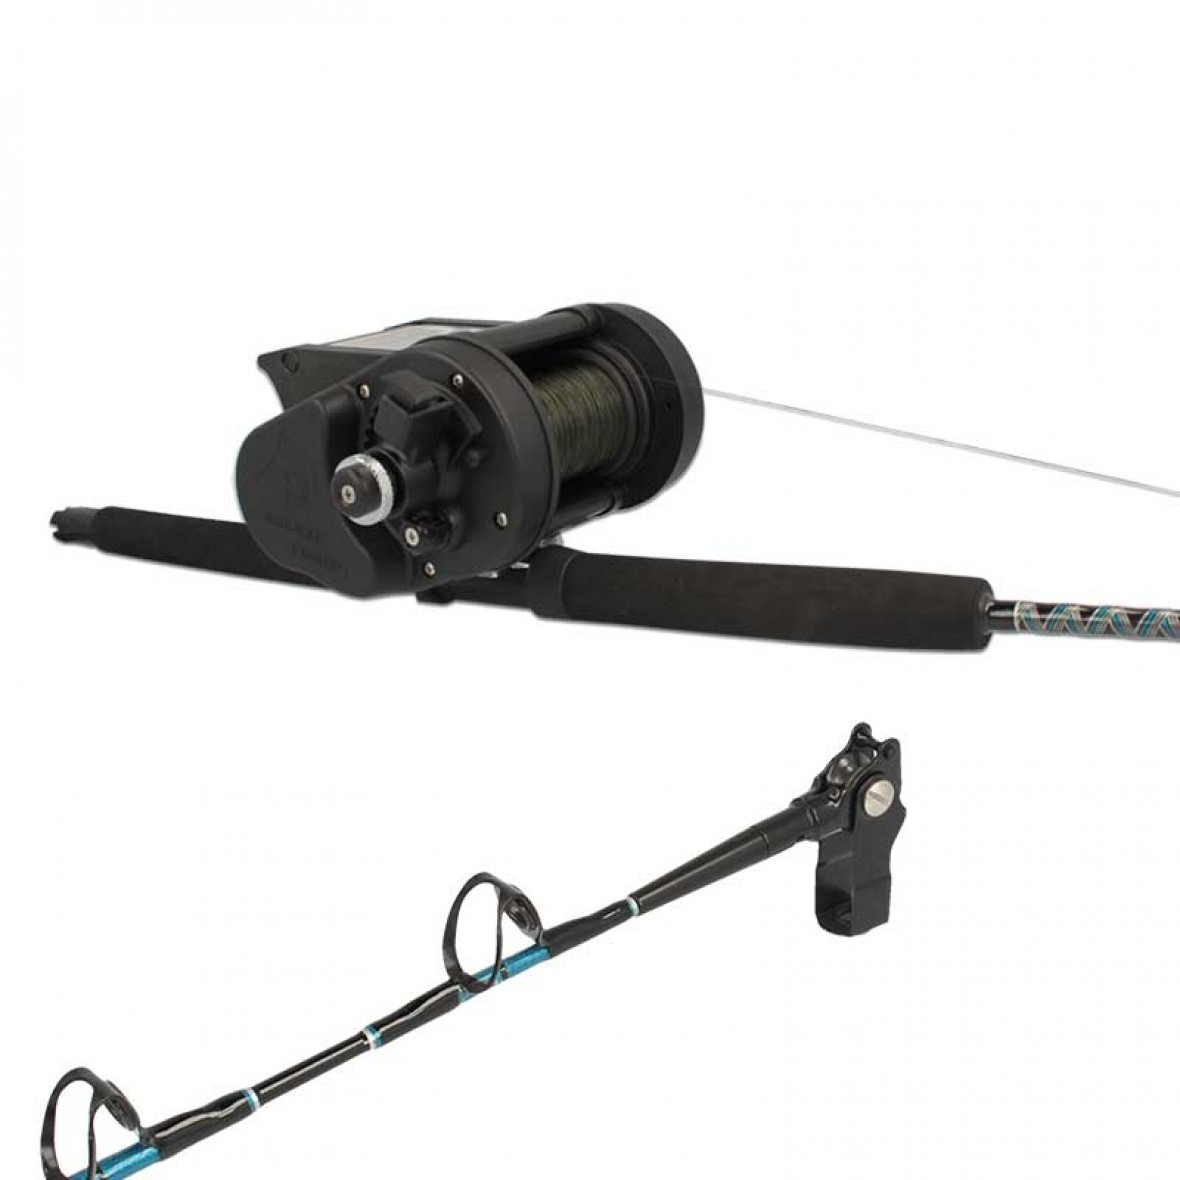 Kristal Fishing XL638 electric fishing reel with Halibut rod